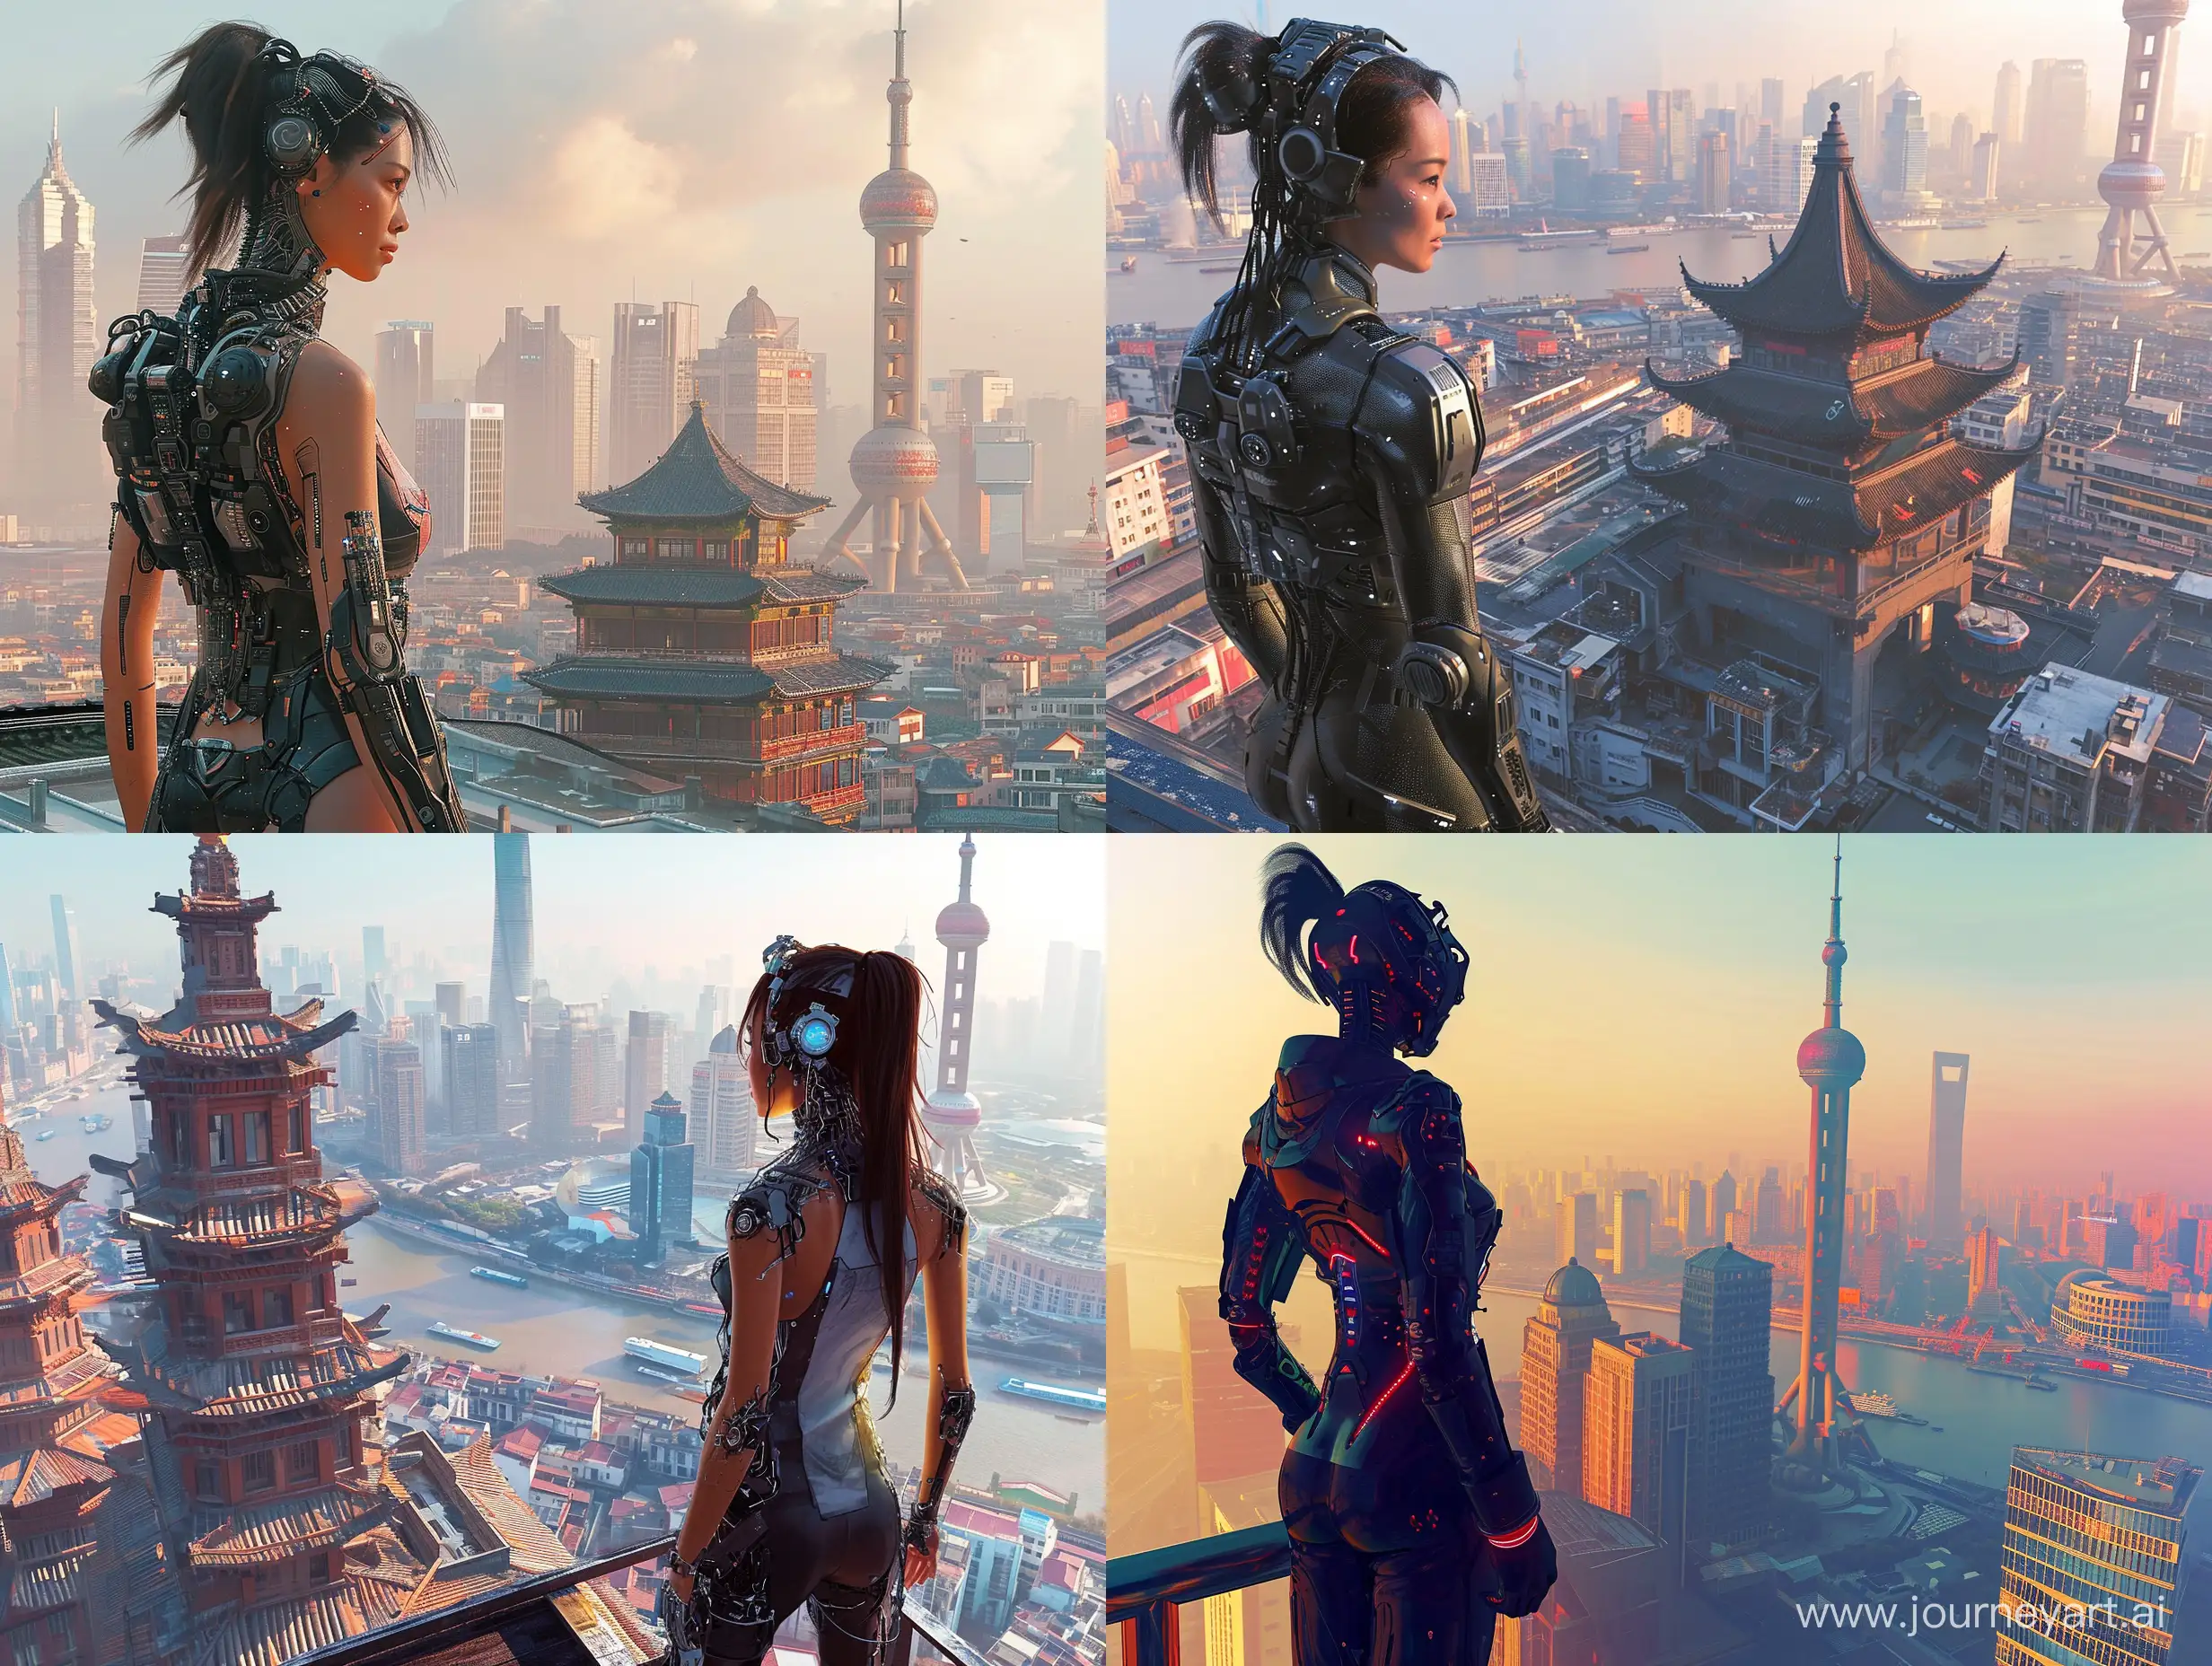 Futuristic-Cybernetic-Woman-Overlooking-Shanghai-Cityscape